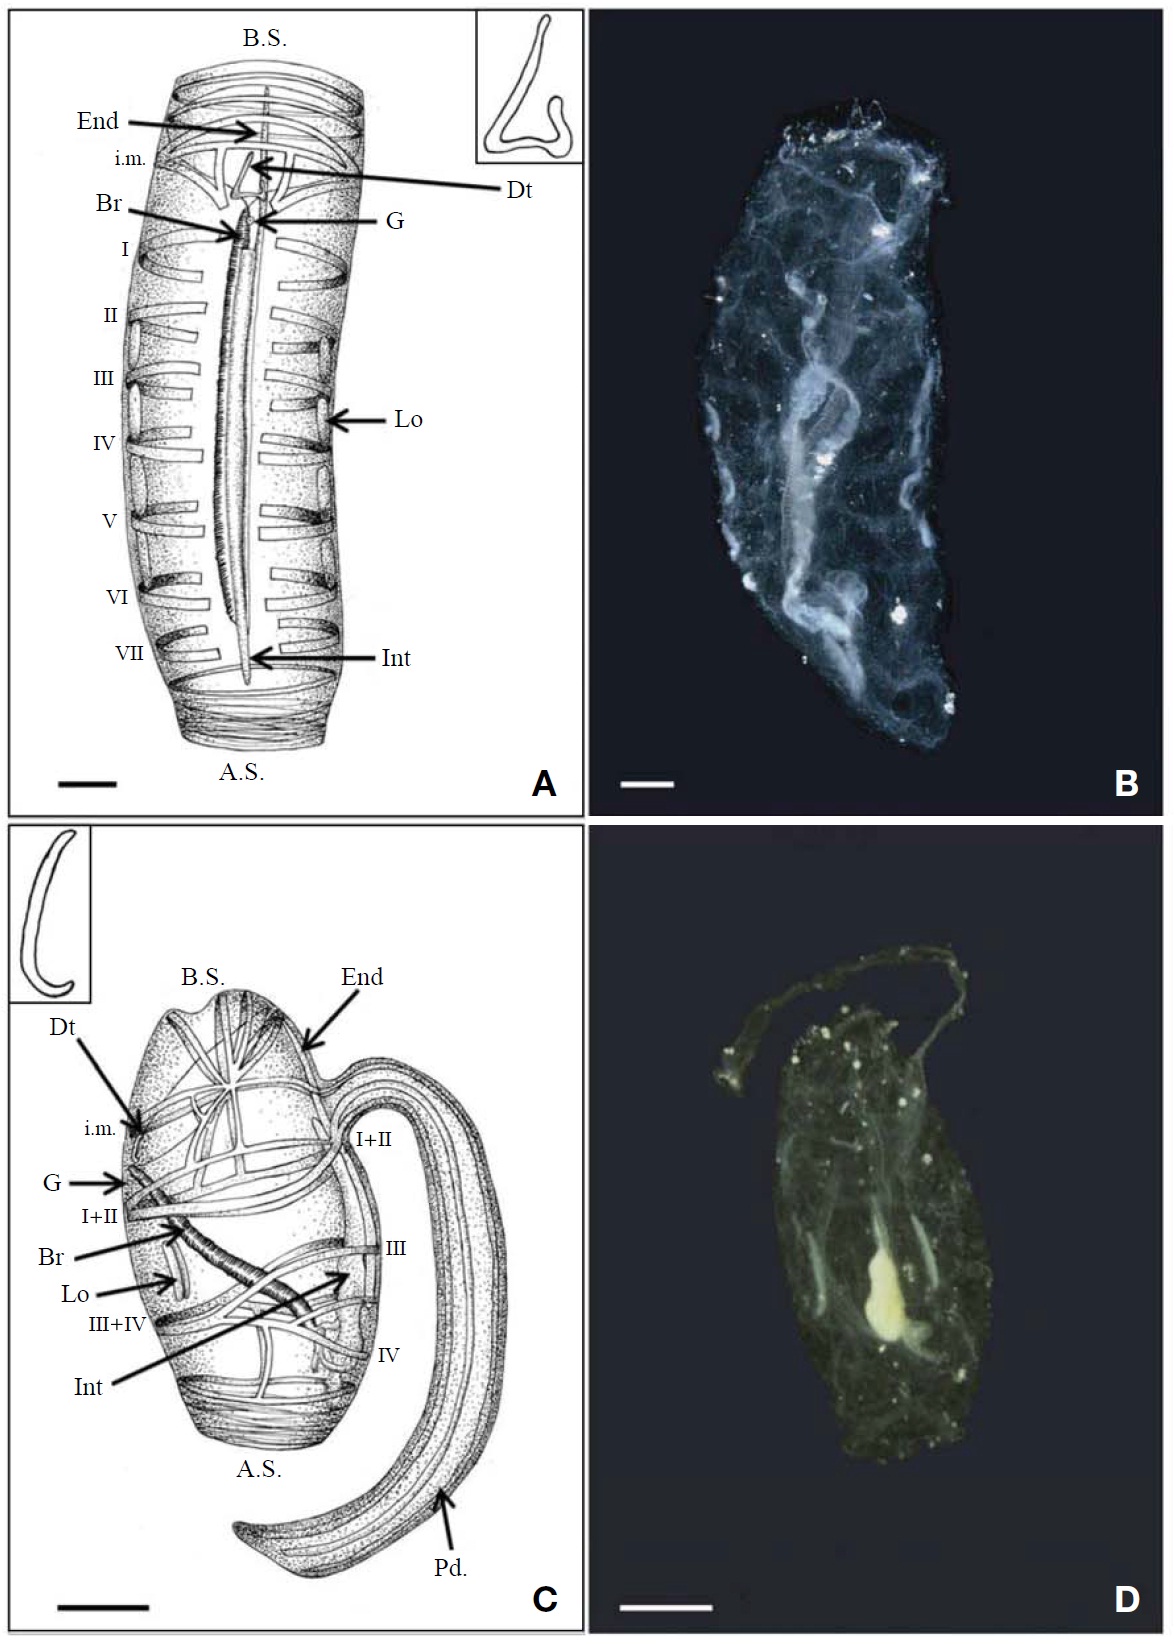 Cyclosalpa sewelli Metcalf, 1927. A, B, Solitary zooid, dorsal view; C, D, Aggregate zooid; C, Right side view; D, Dorsal view. A.S., atrial siphon; Br, branchial septum; B.S., buccal siphon; Dt, dorsal turbercle; End, endostyle; G, ganglion; i.m., intermediate muscle; Int, Intestine; I-VI, body muscles; Lo, light organs; Pd., peduncle. Scale bars: A, B=1 mm, C, D=2 mm.